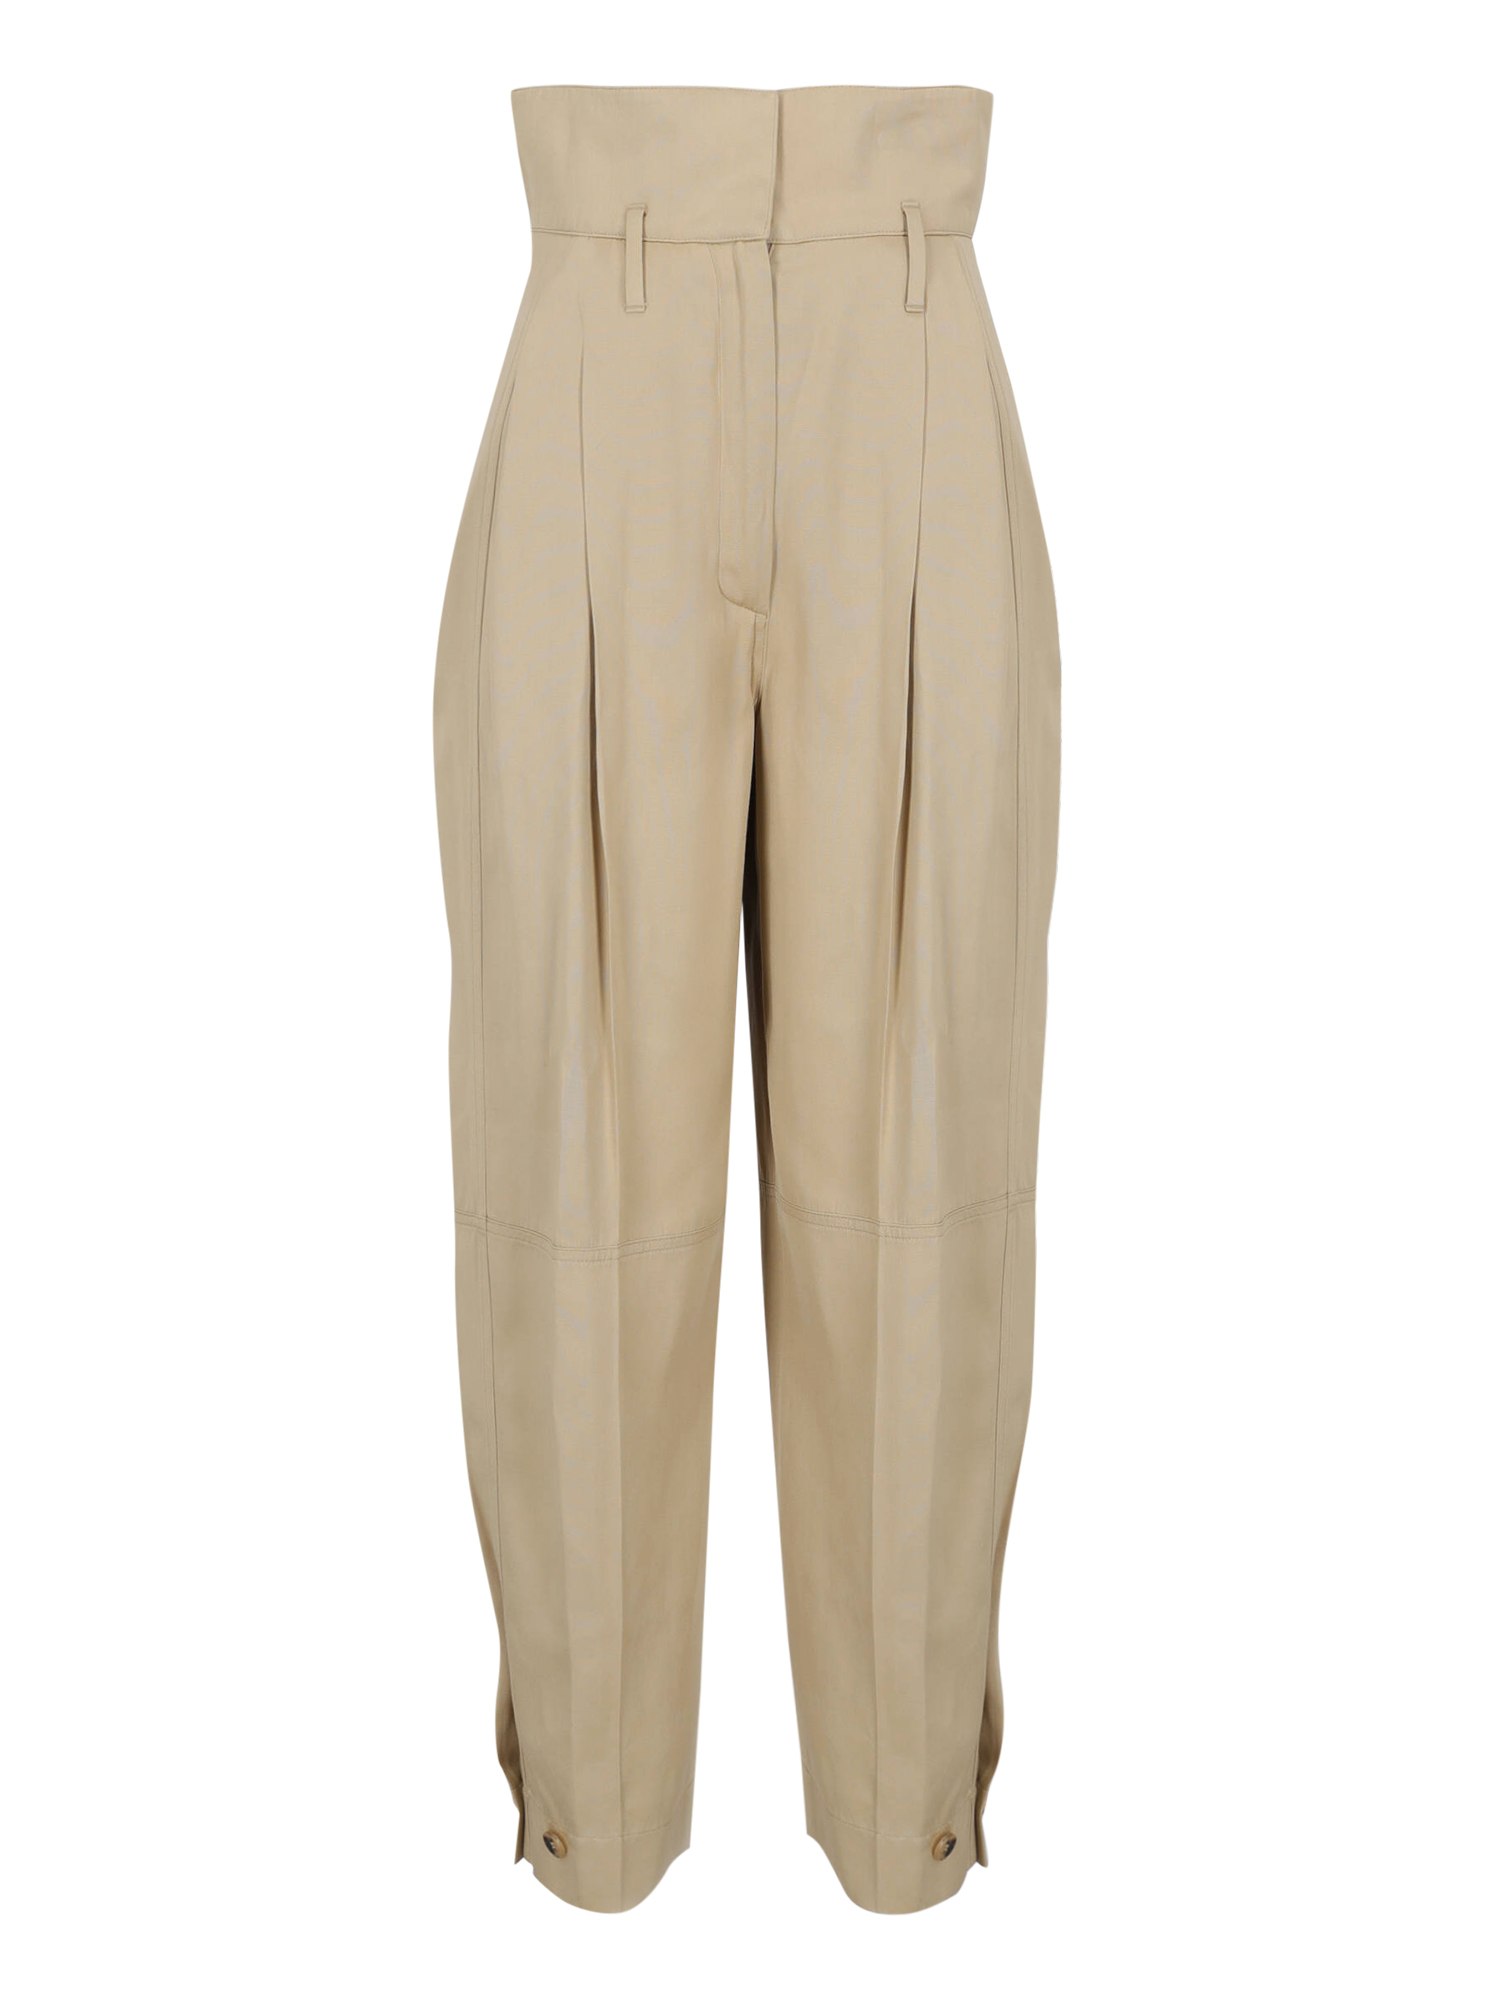 Condition: Excellent, Solid Color Synthetic Fibers, Color: Beige - XS - FR 34 -